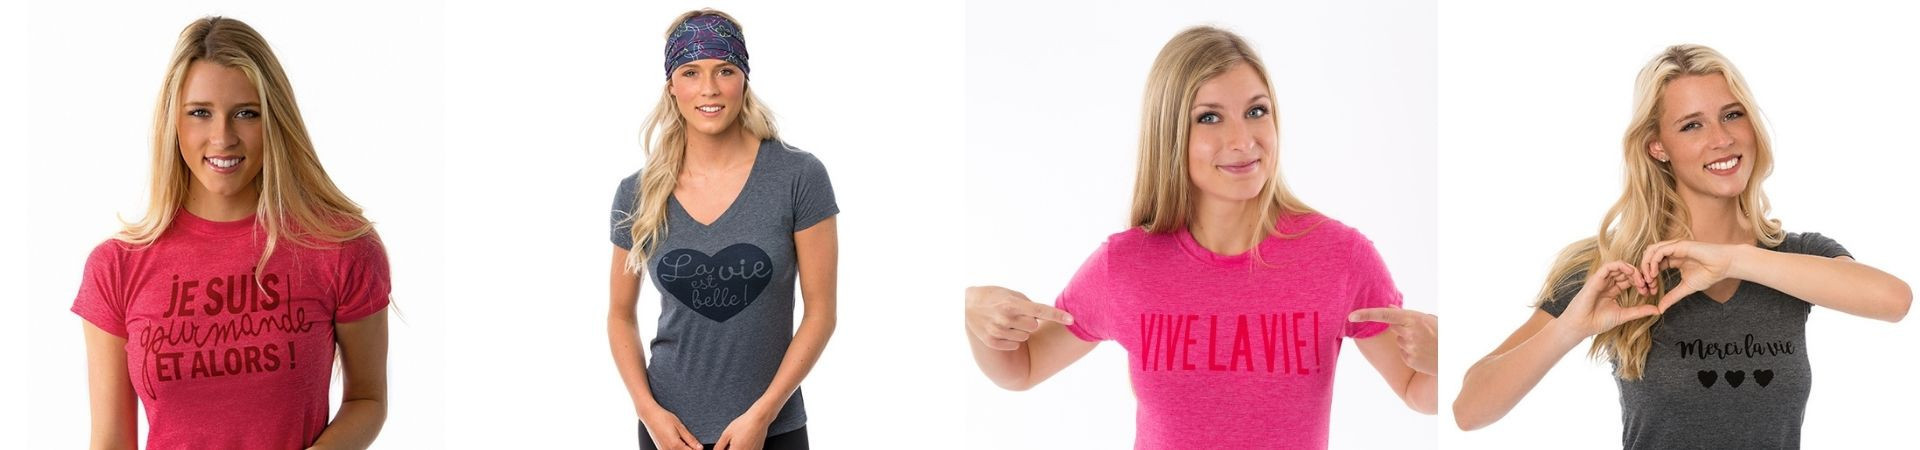 Fashionable T-shirts made in Quebec - Men and Women